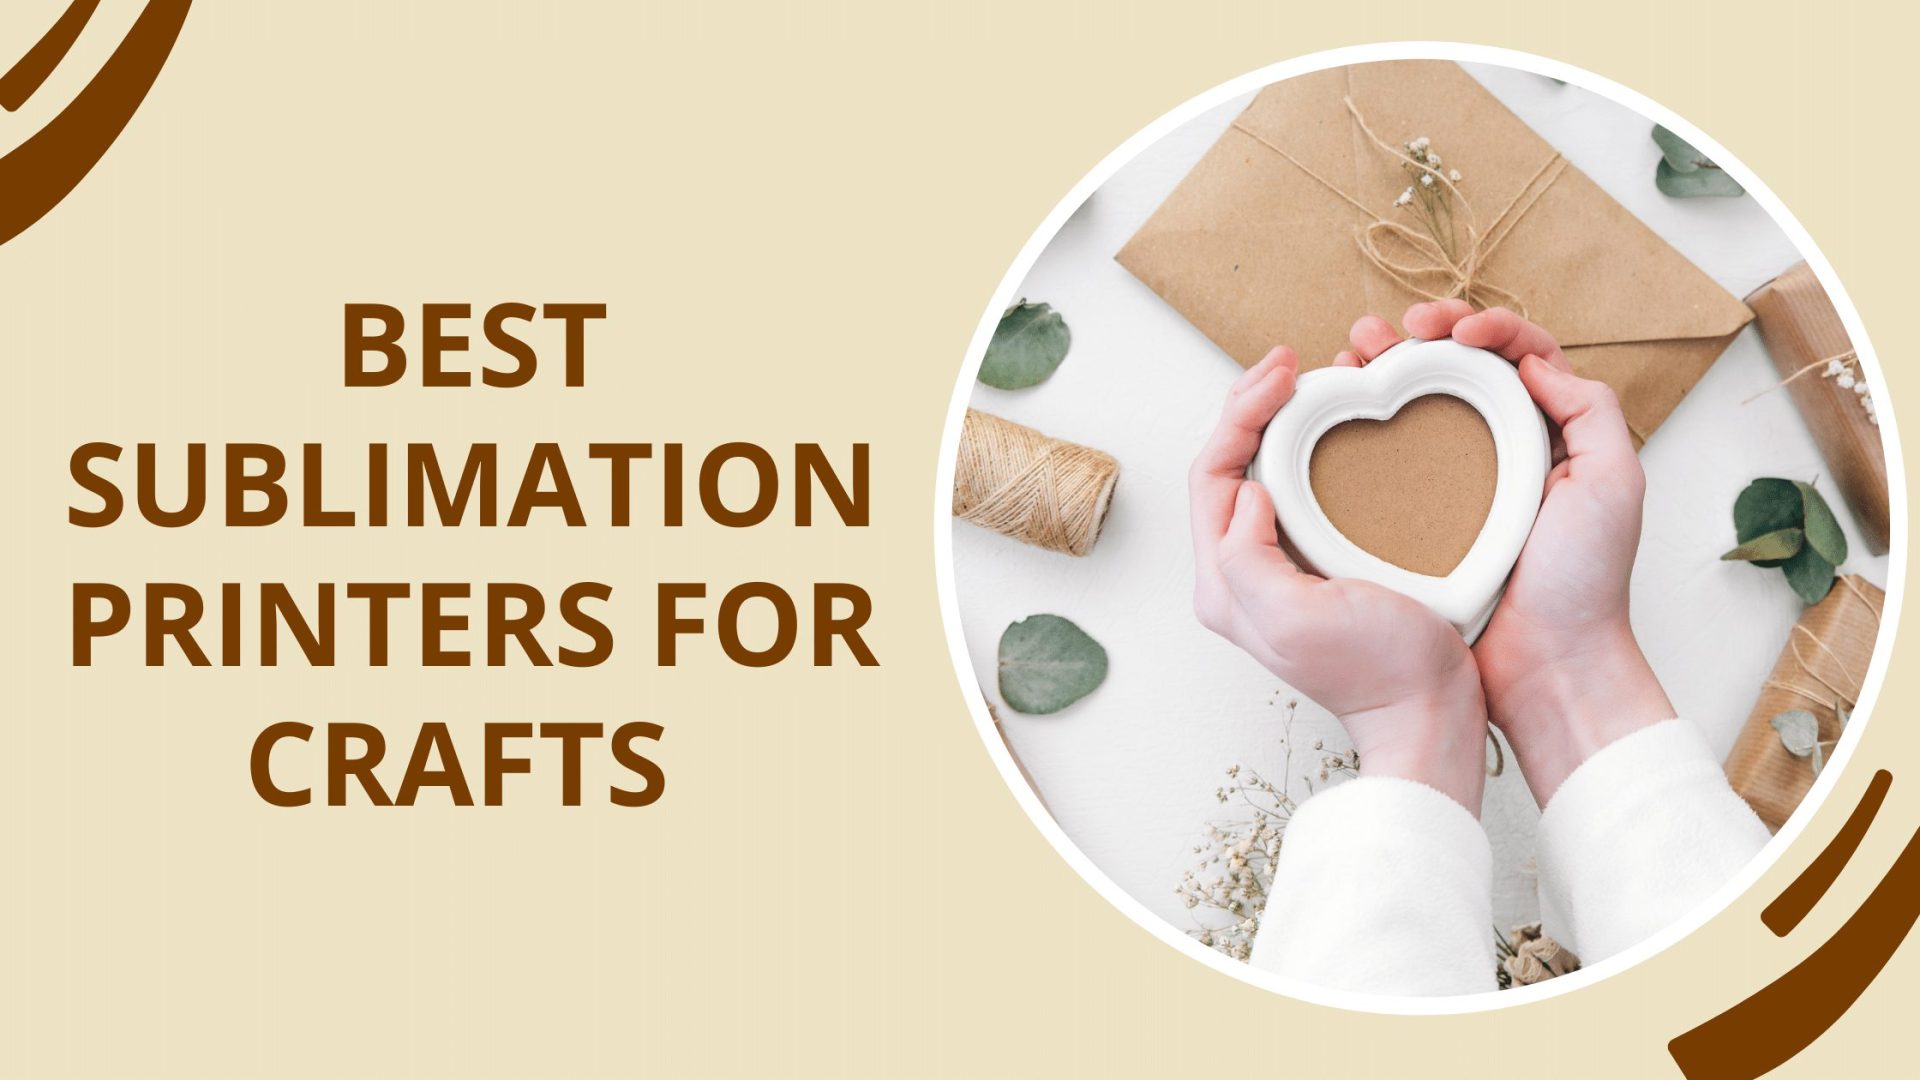 Best Sublimation Printers for Crafts